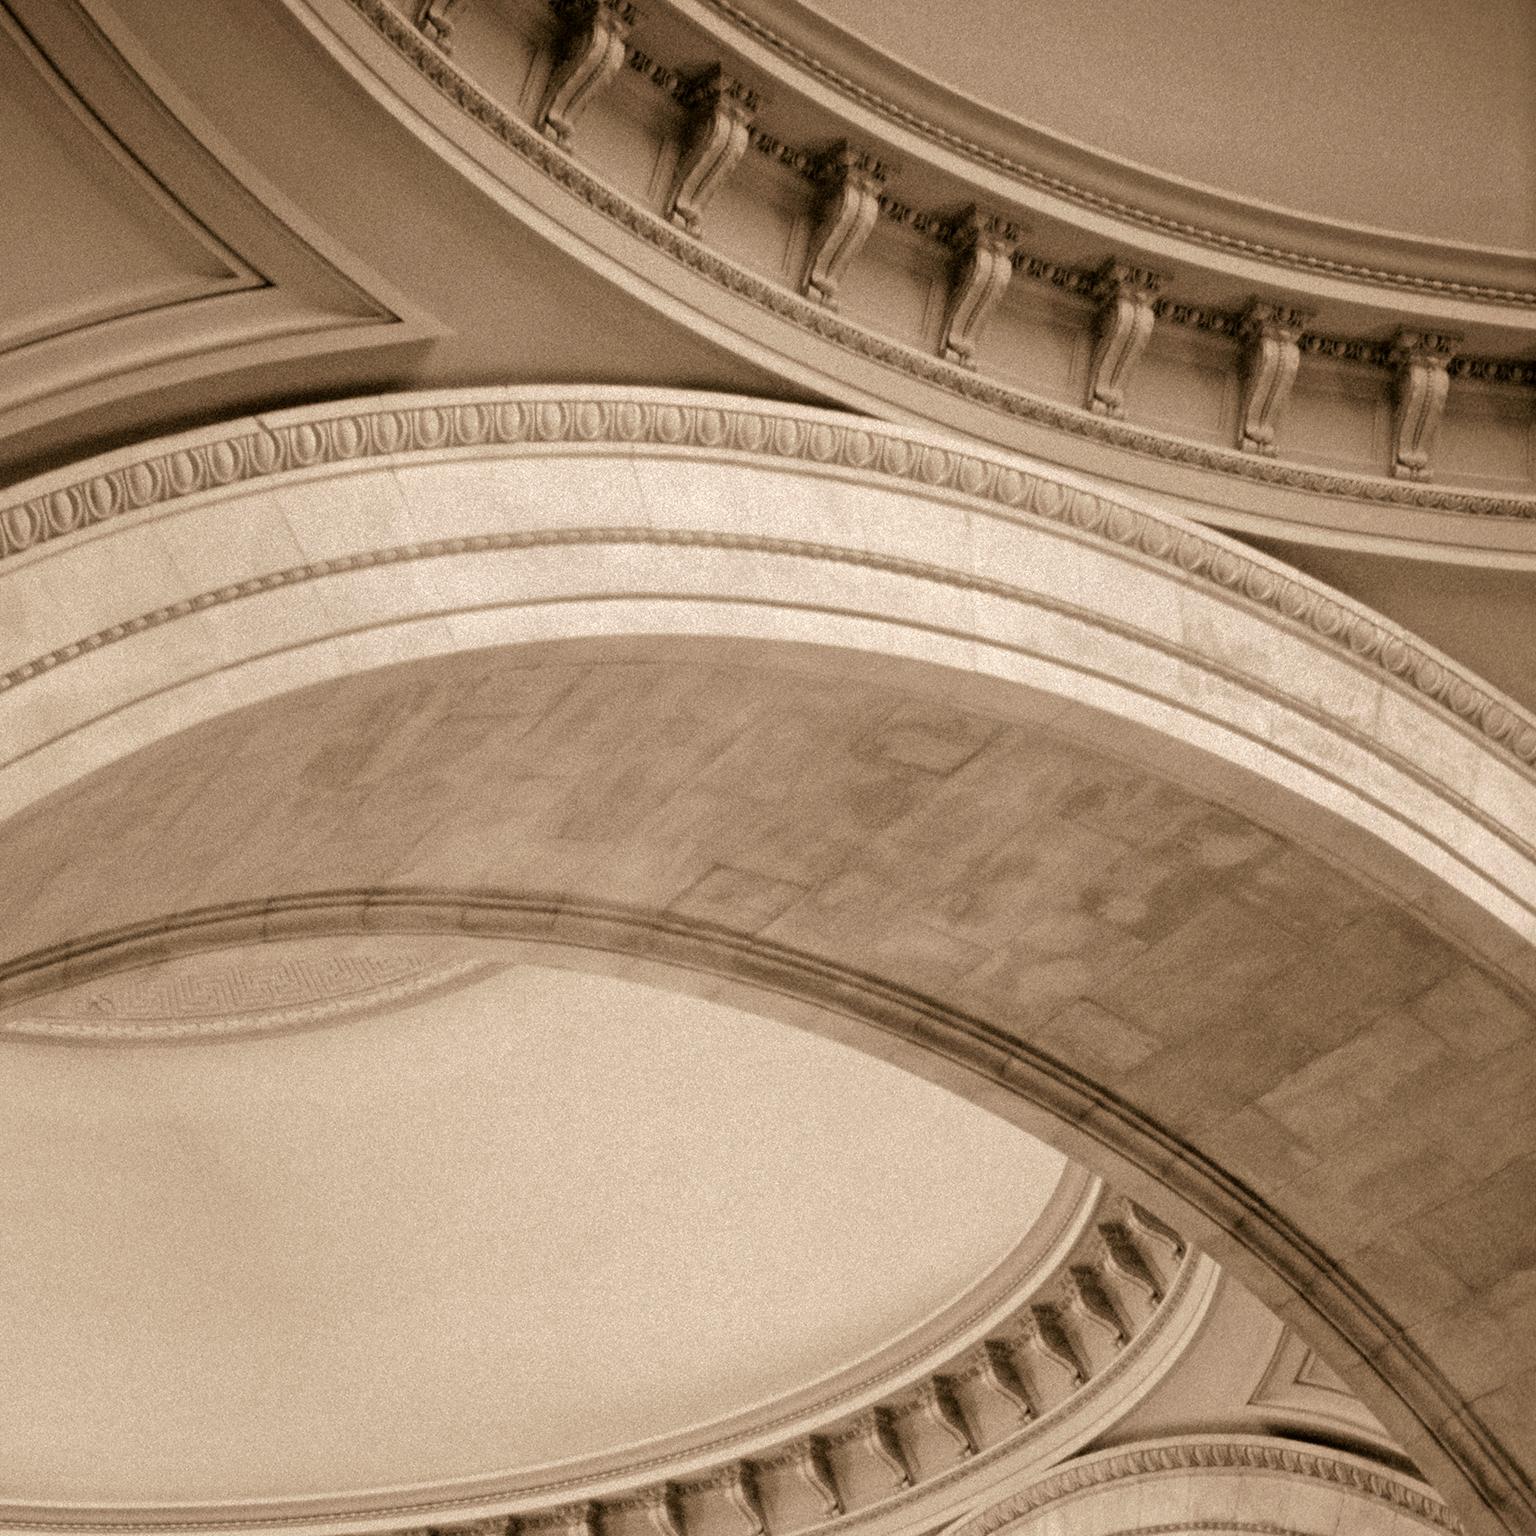 Symphony of Arches. New York City, USA, 2001 - Photograph by  Cosmo Condina